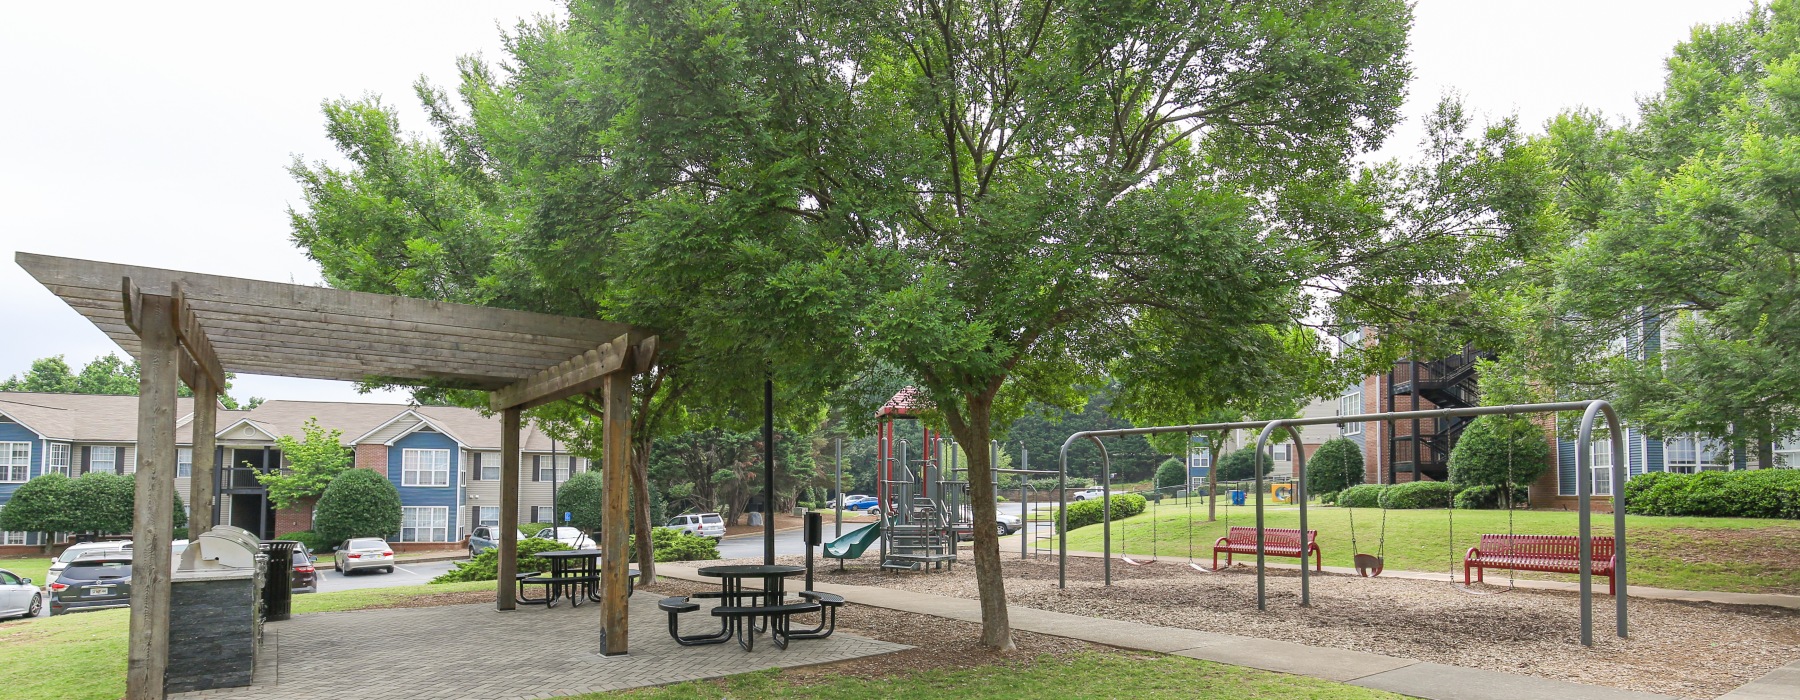 Grill and picnic area surrounded by trees near playground